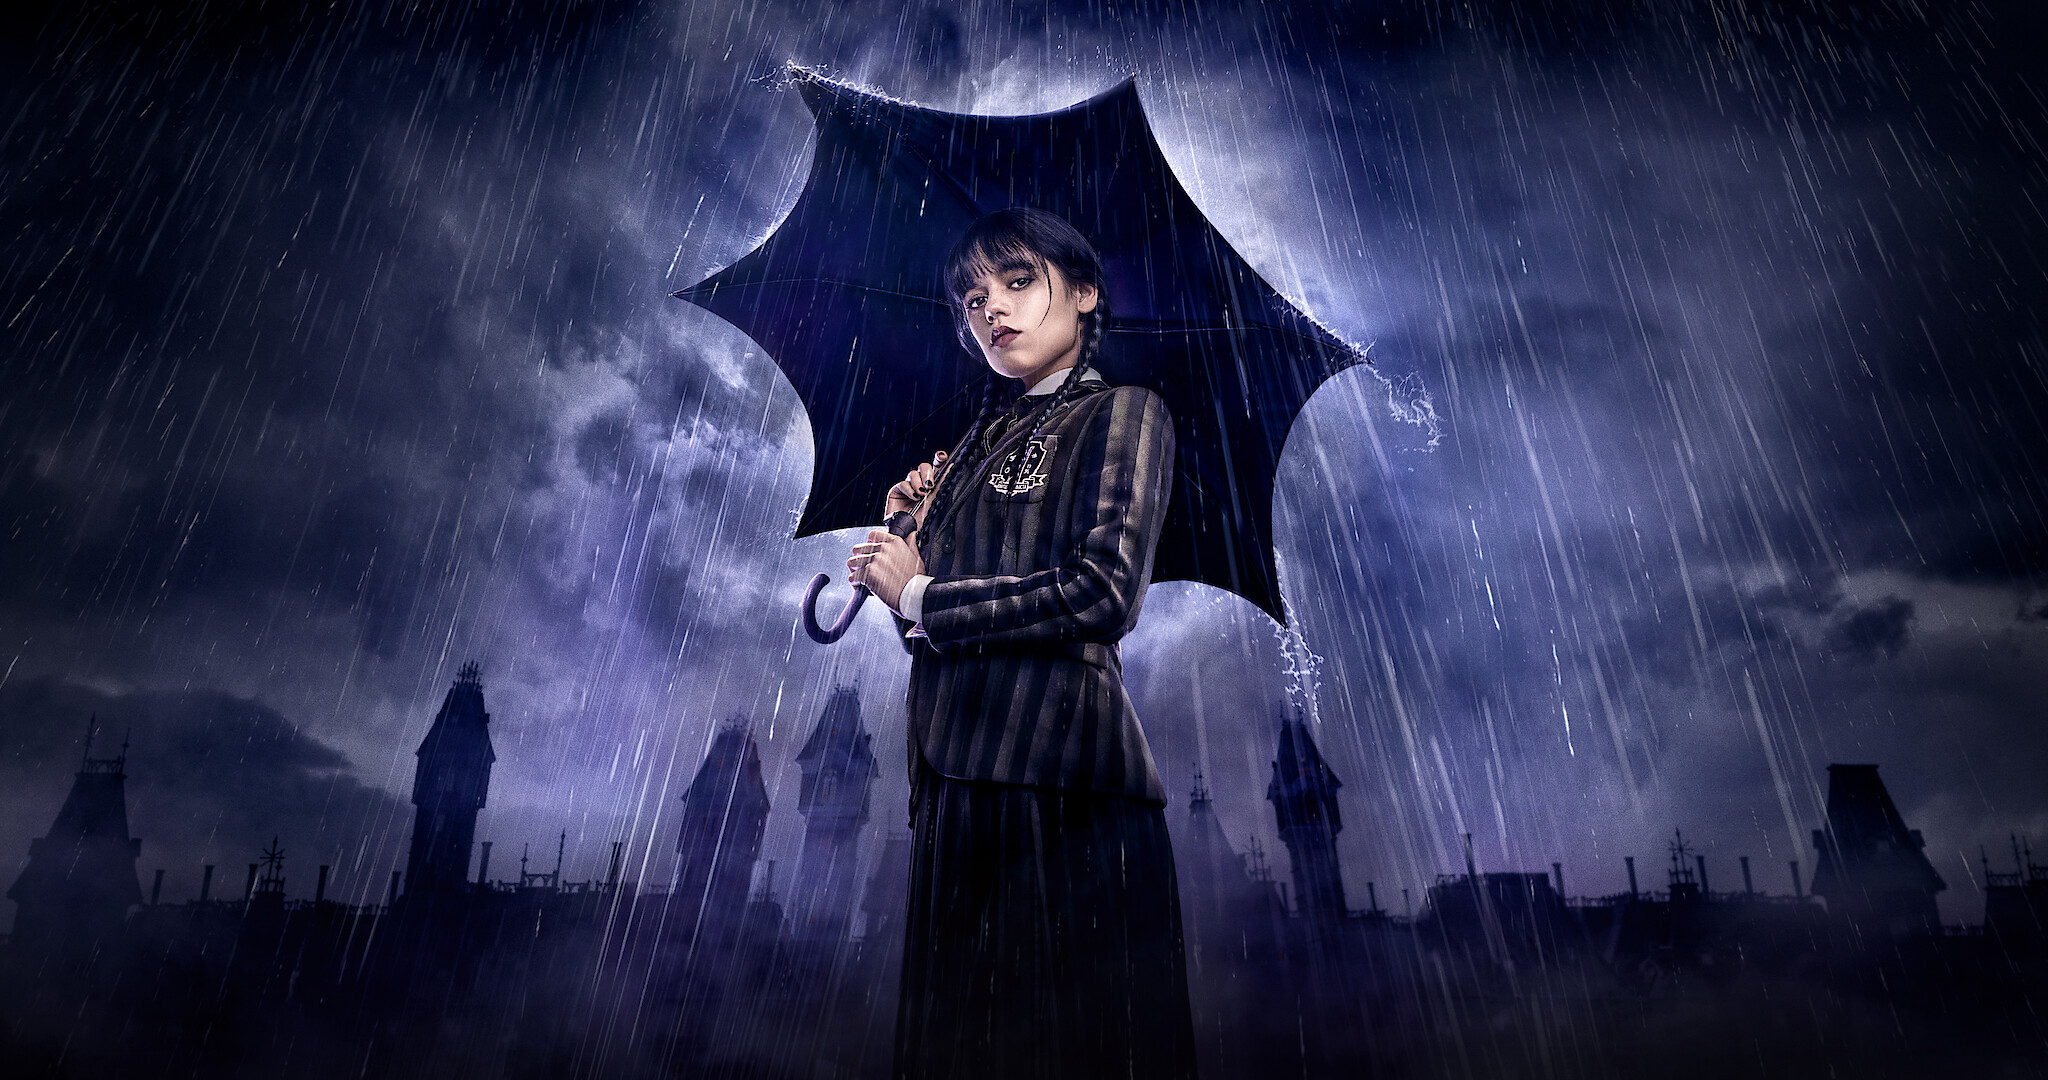 Addams Family Add New Members For Spookier Season 2 Of 'Wednesday'!